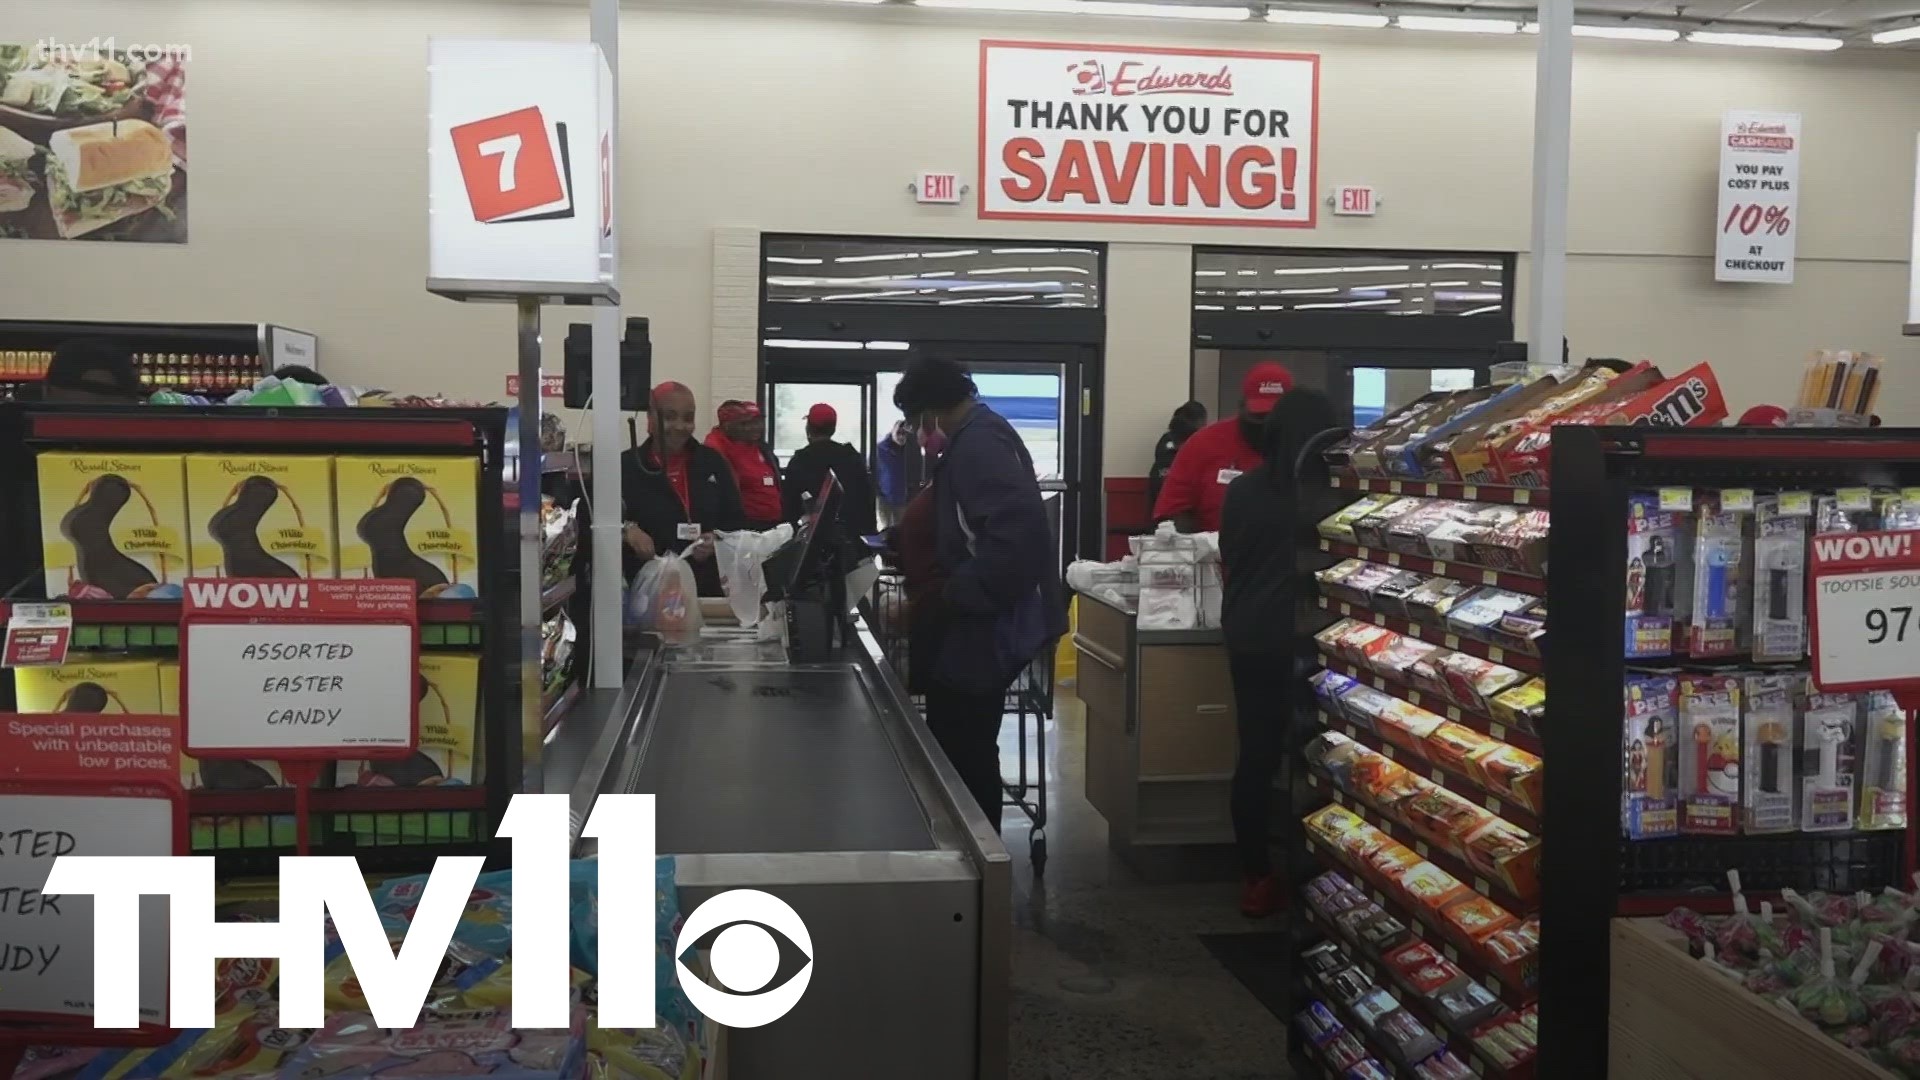 City leaders in southwest Little Rock expressed concerns about the area becoming a food desert, which led to the opening of Edwards Cash Saver.